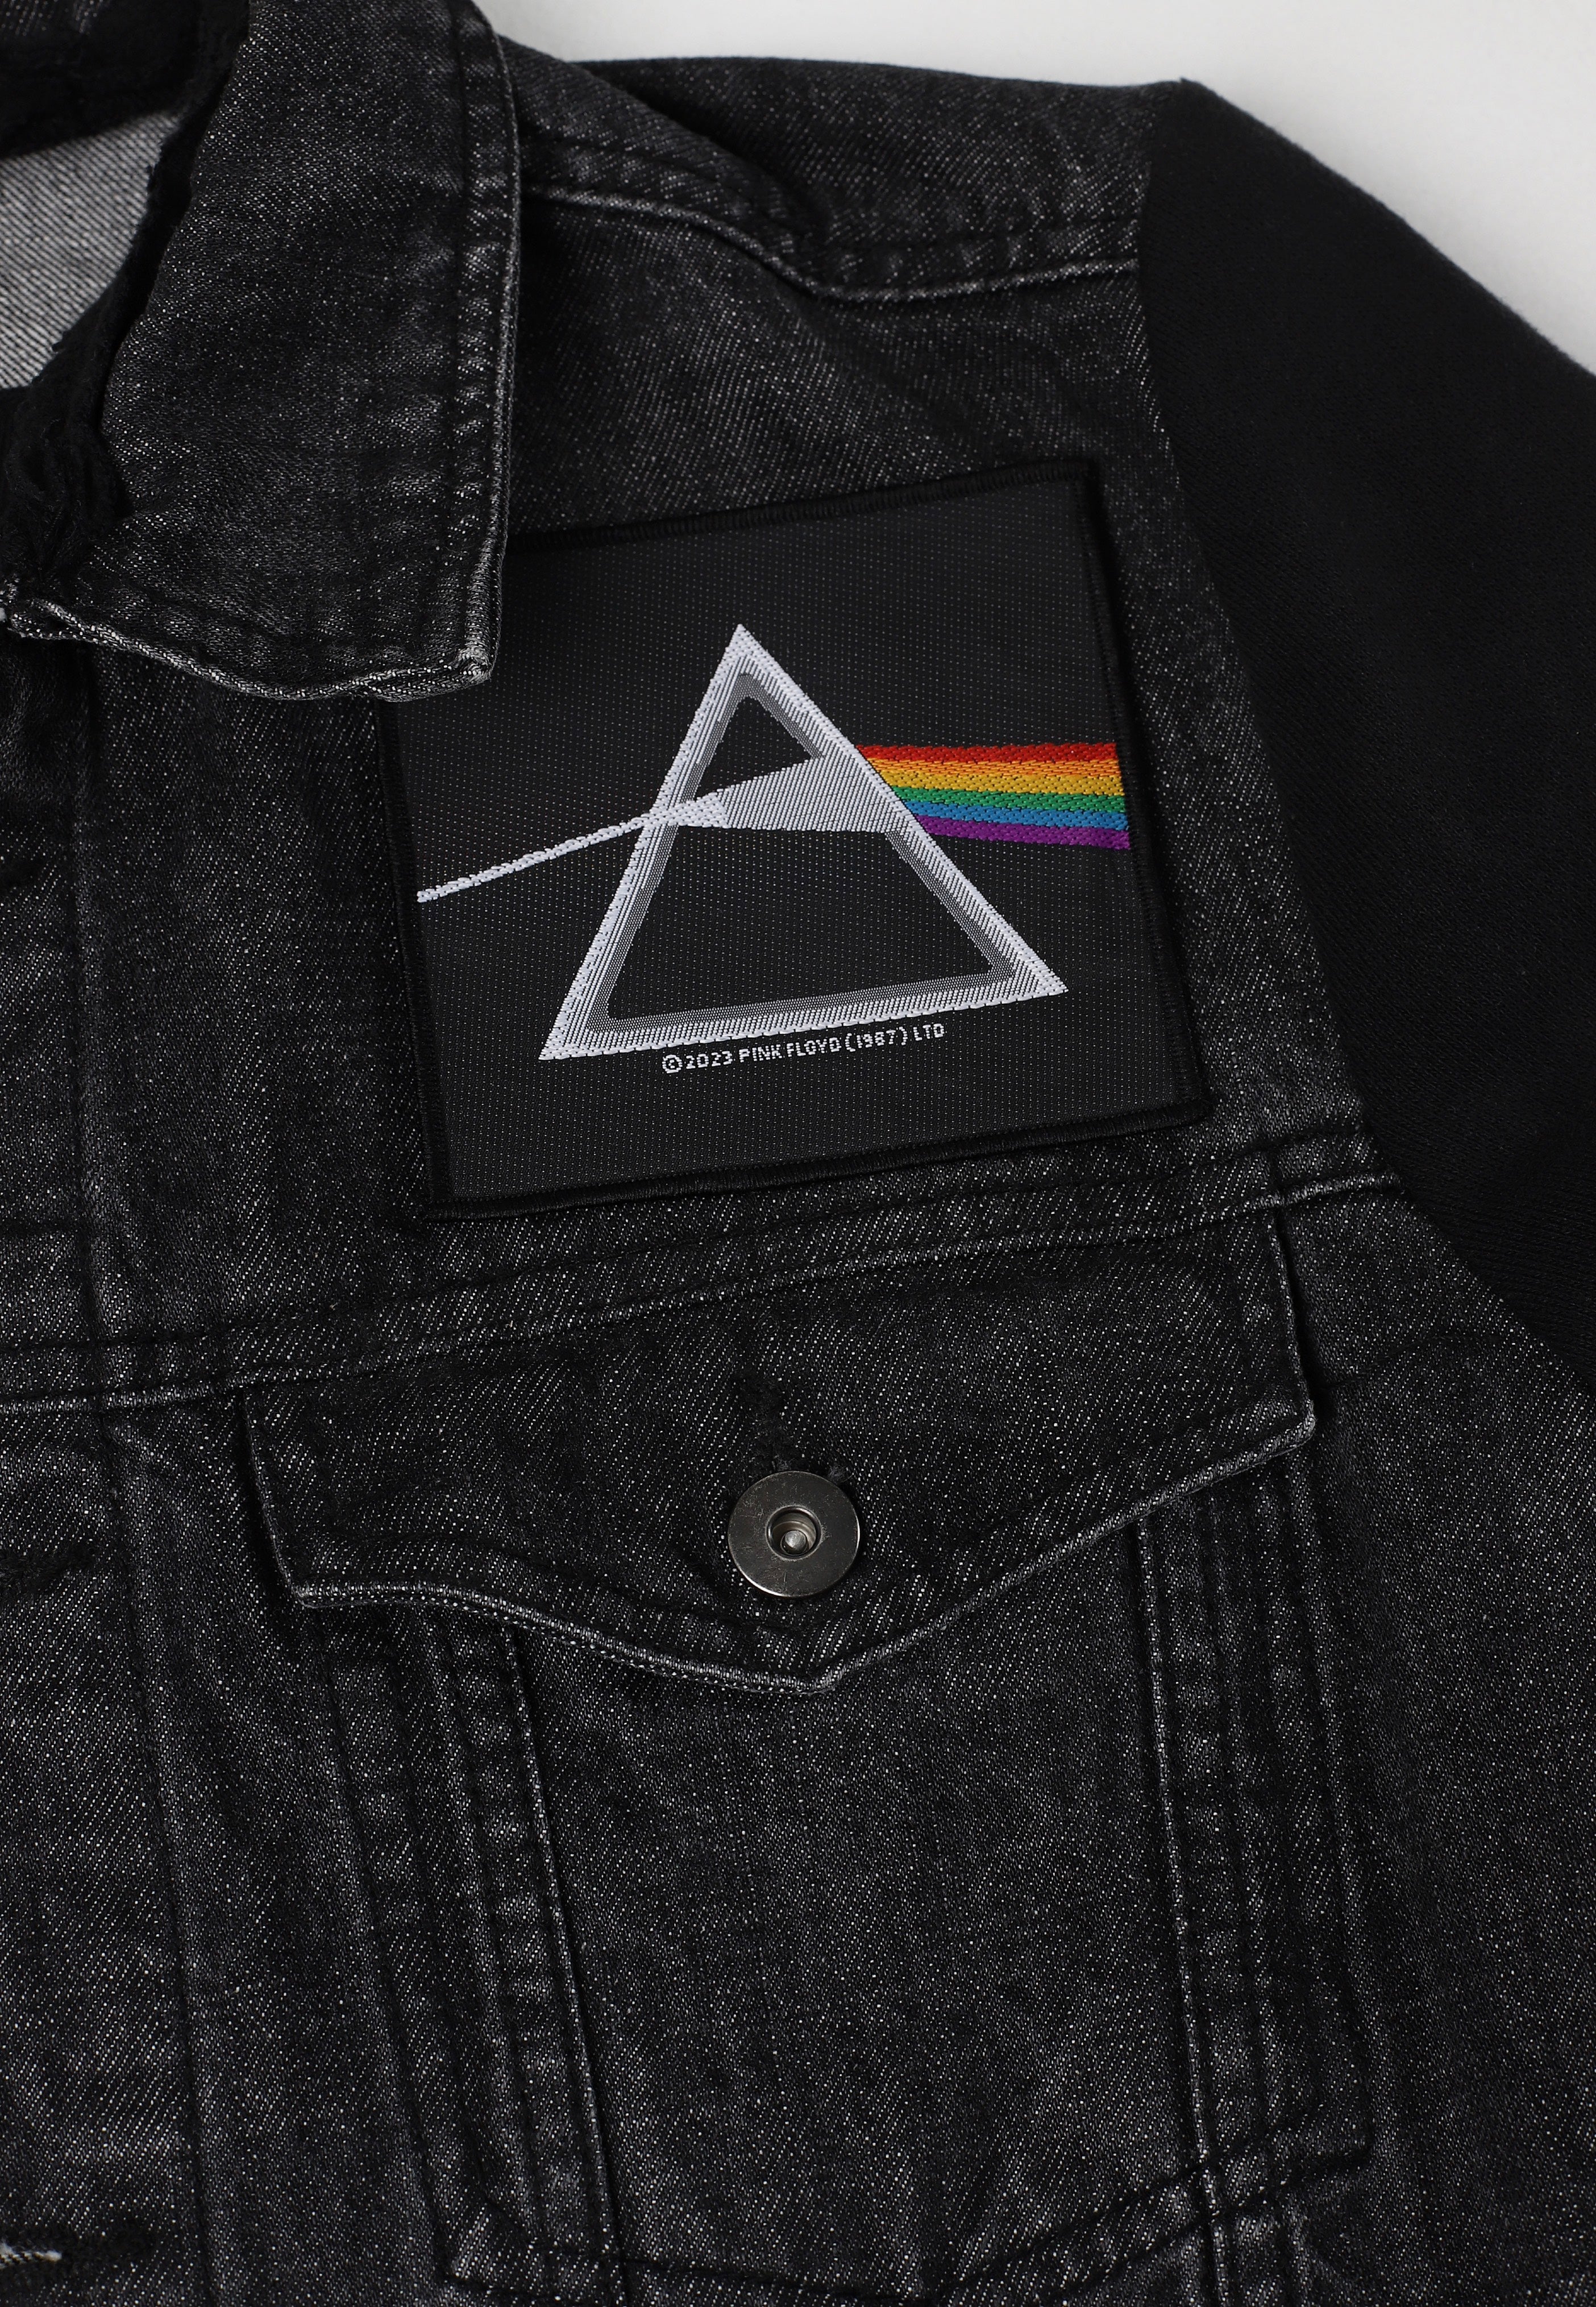 Pink Floyd - Dark Side Of The Moon - Patch